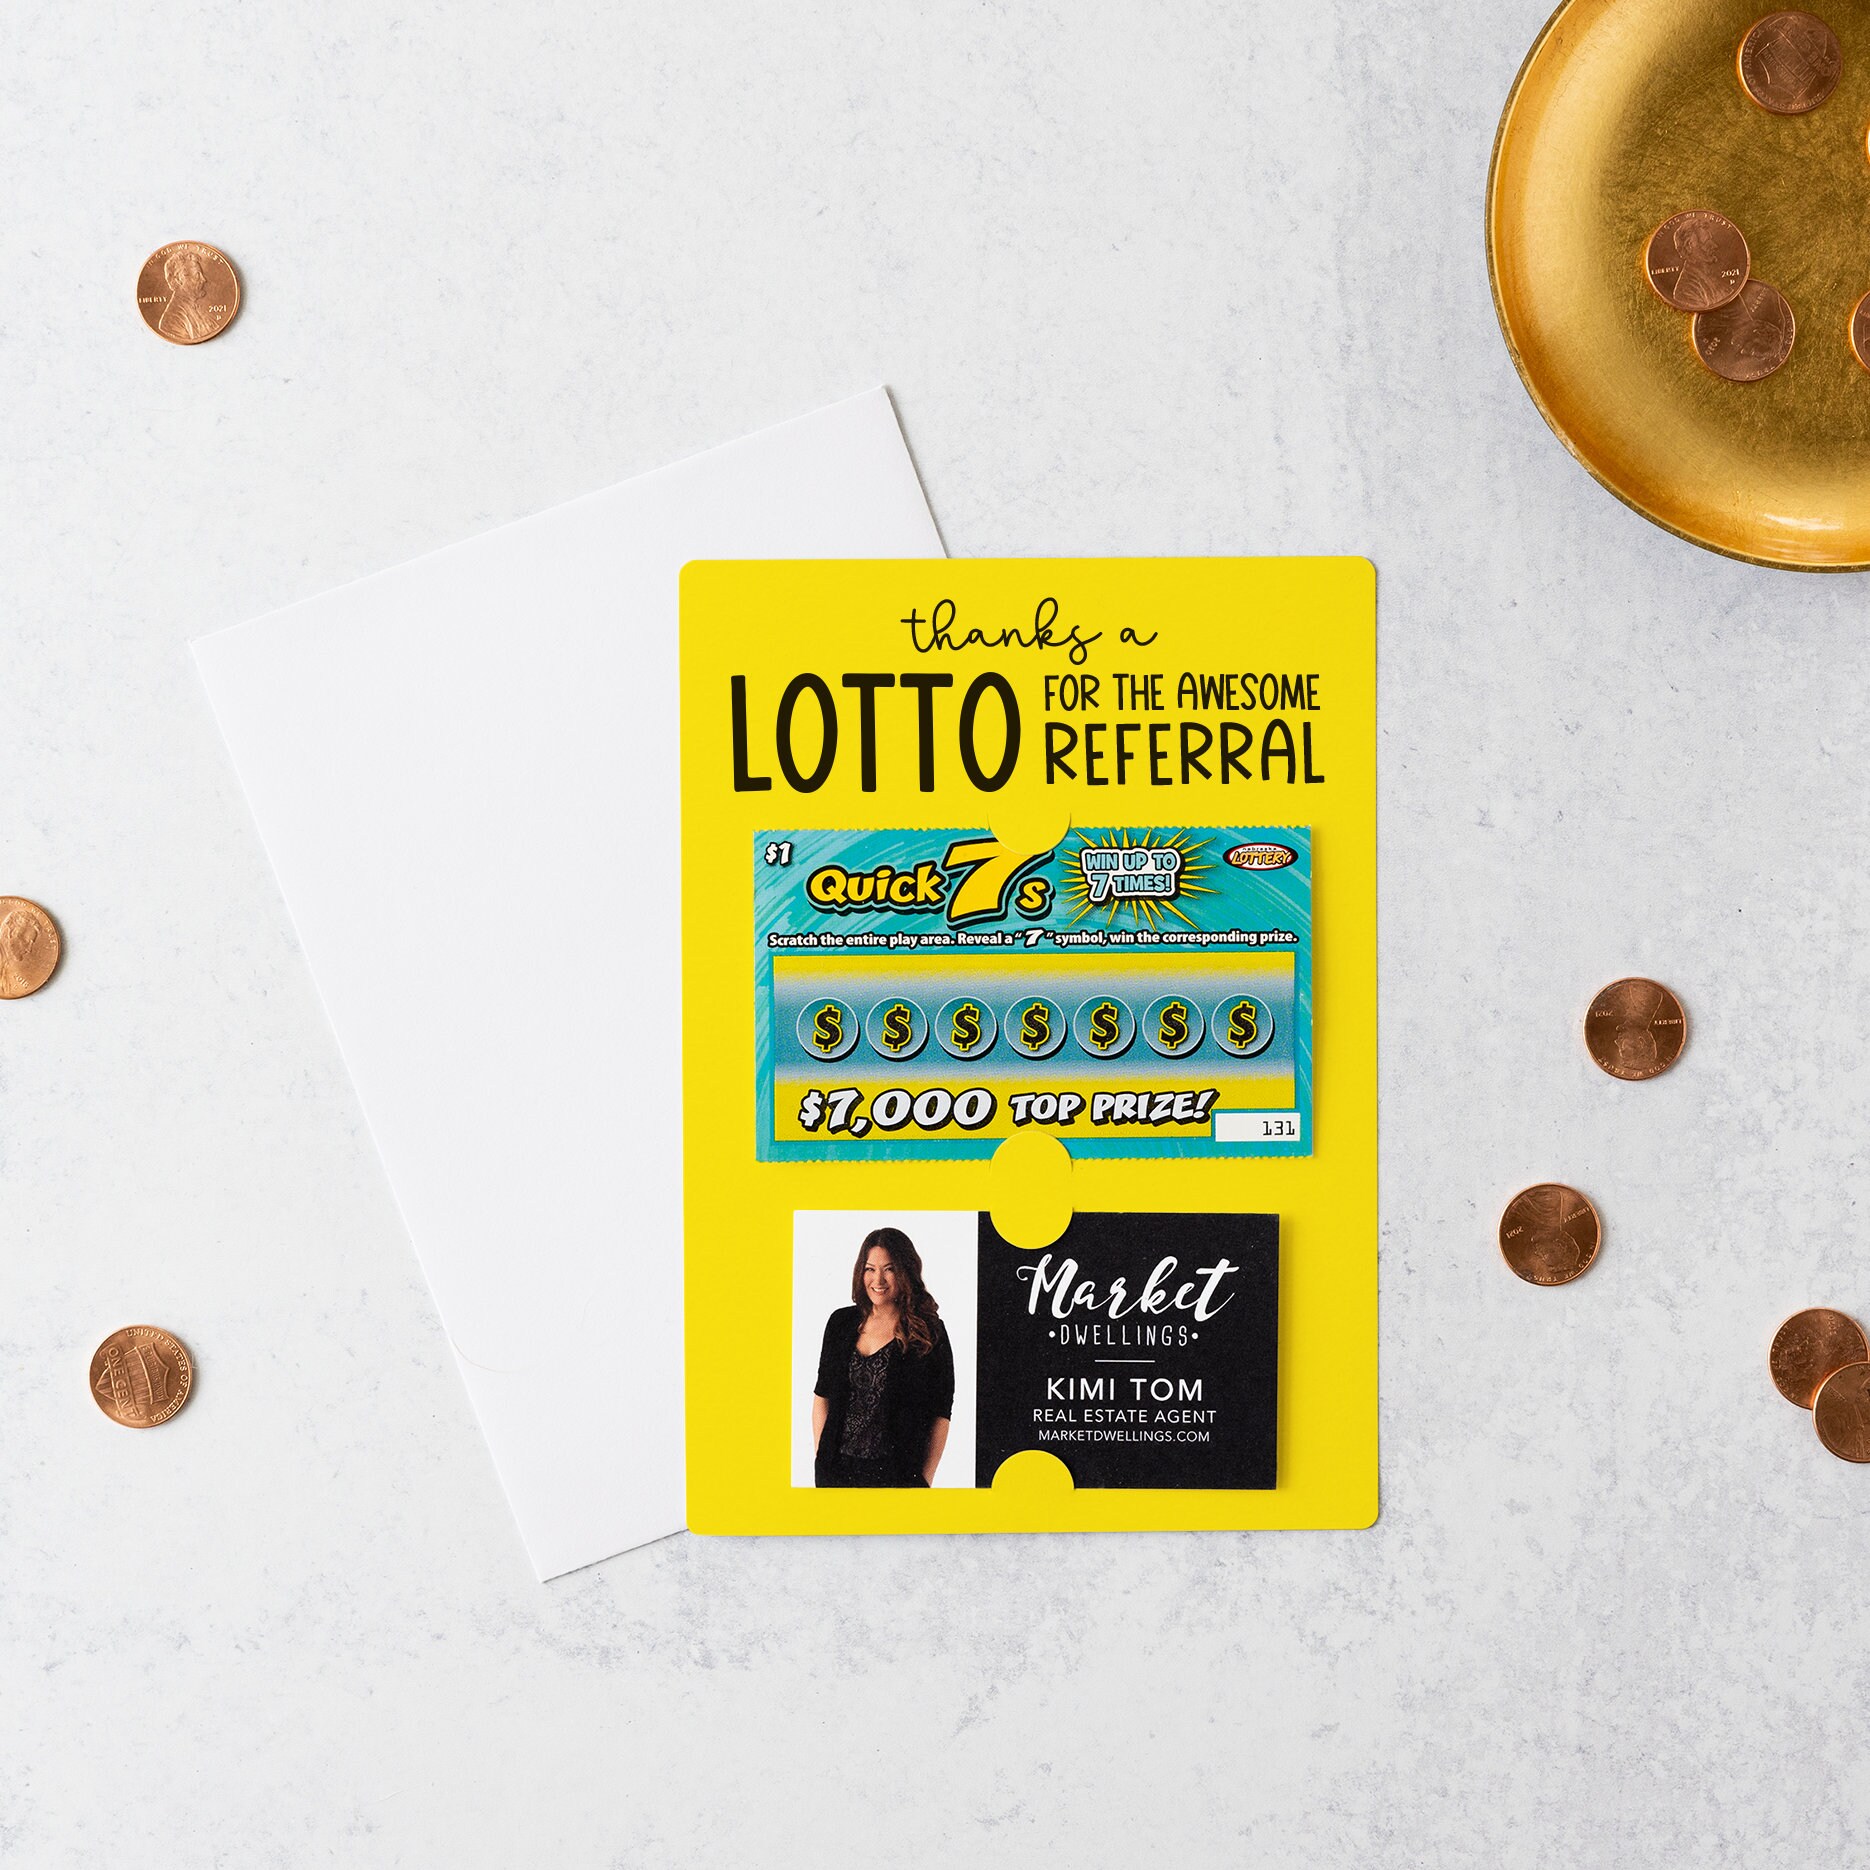 SET of Thanks a Lotto for the Awesome Referral Mailer W/